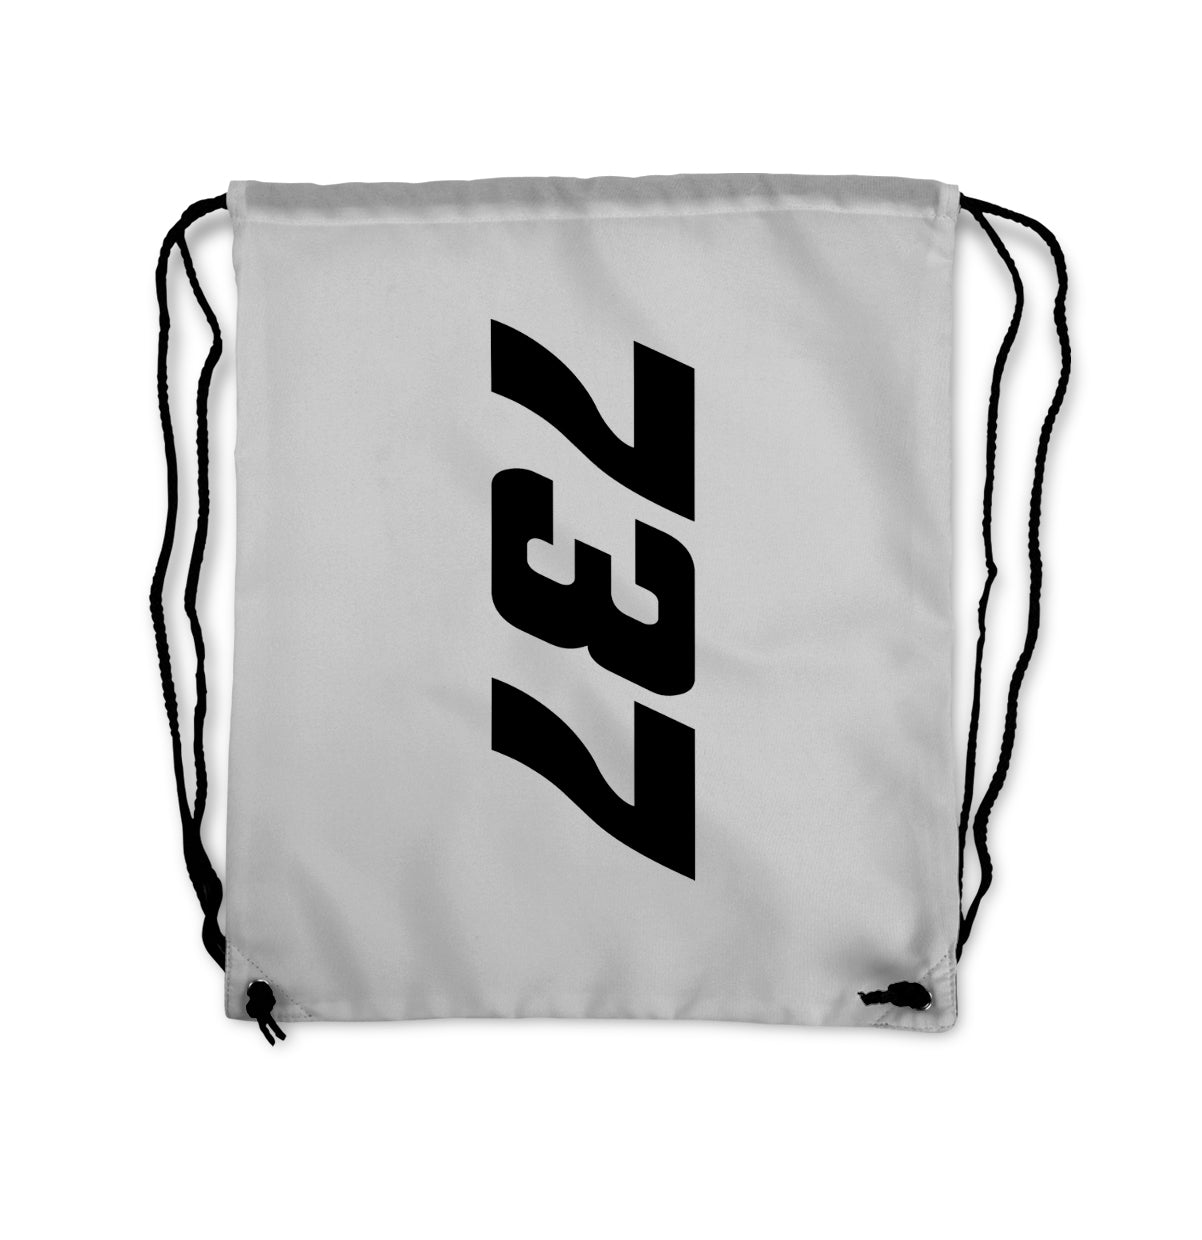 Boeing 737 Text Designed Drawstring Bags